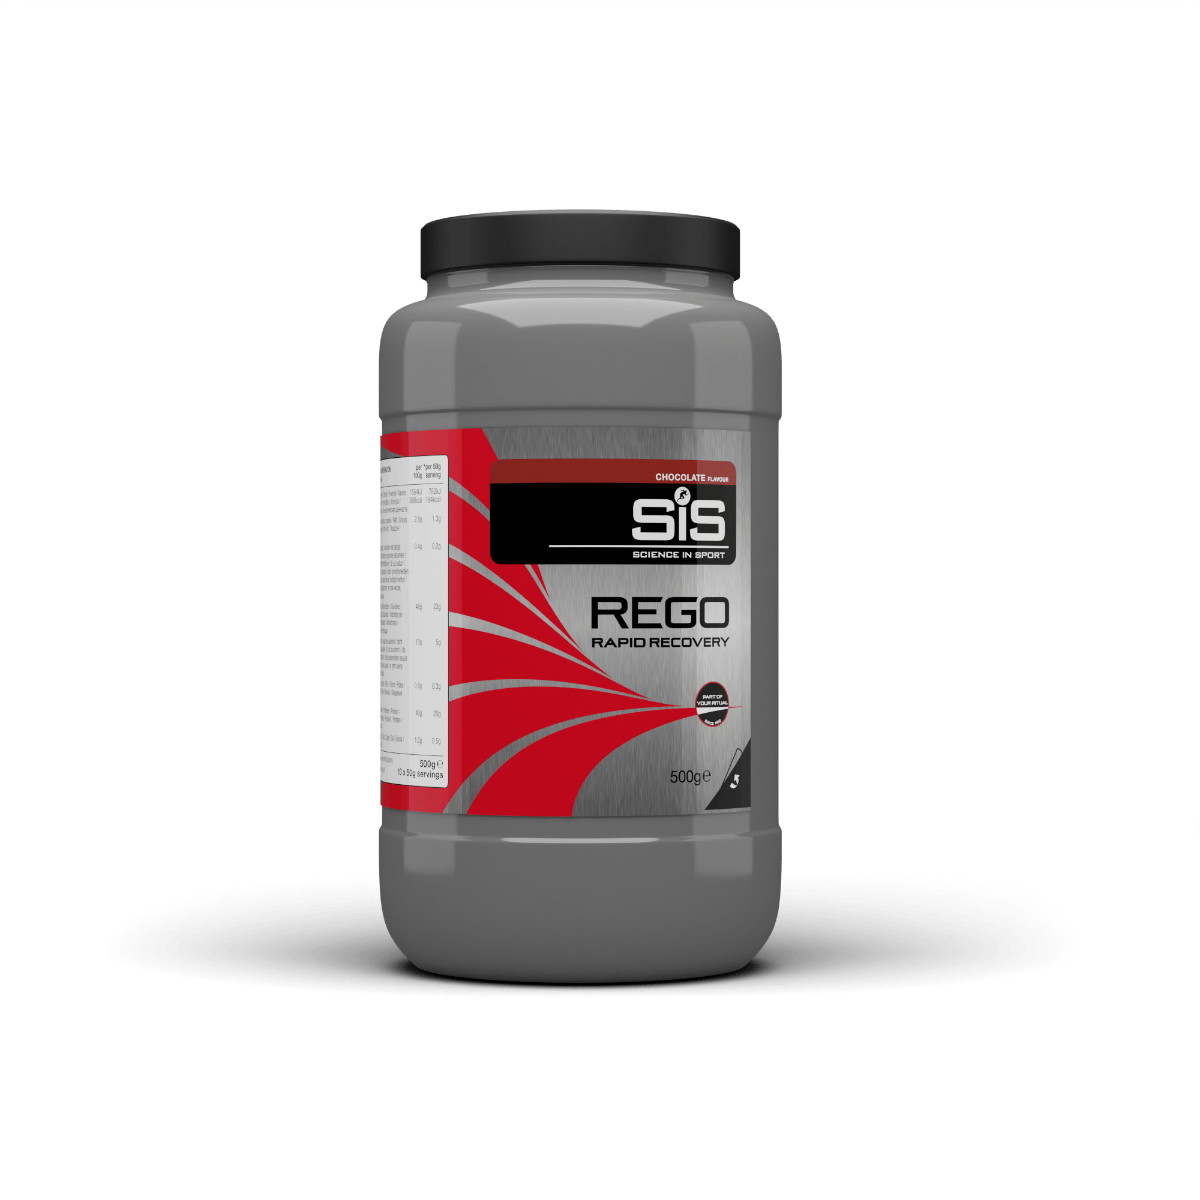 SiS Protein Drink 10 Serving Tub (500g) / Chocolate REGO Rapid Recovery XMiles